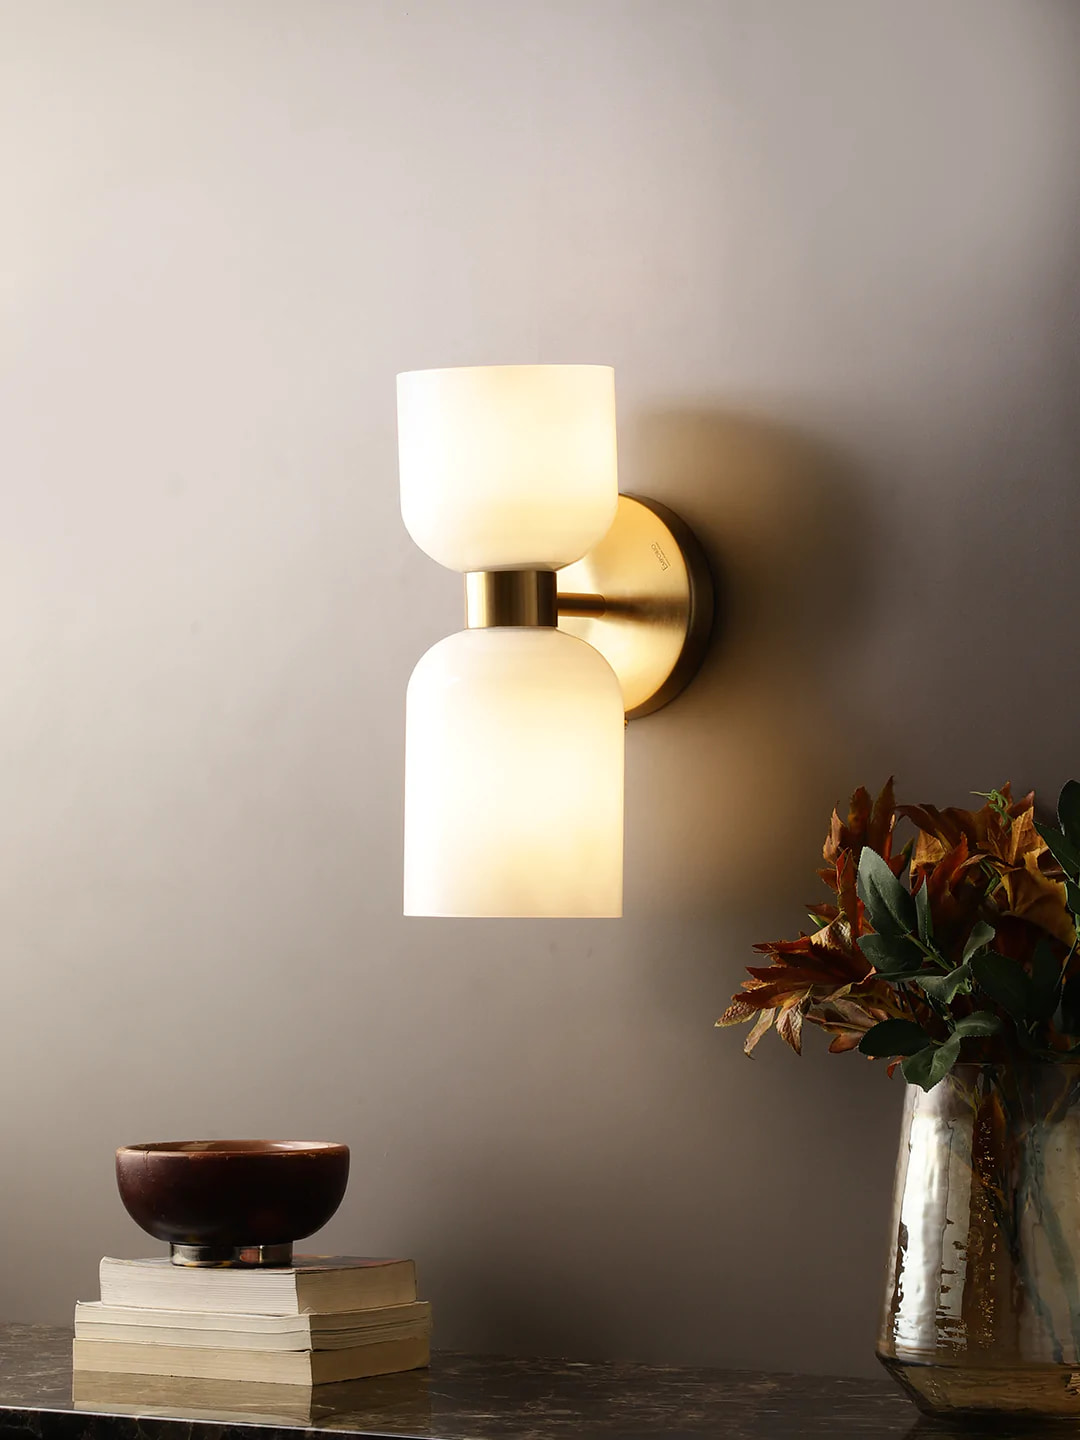 elegant and sophisticated lamp, stylish and unique design for modern homes